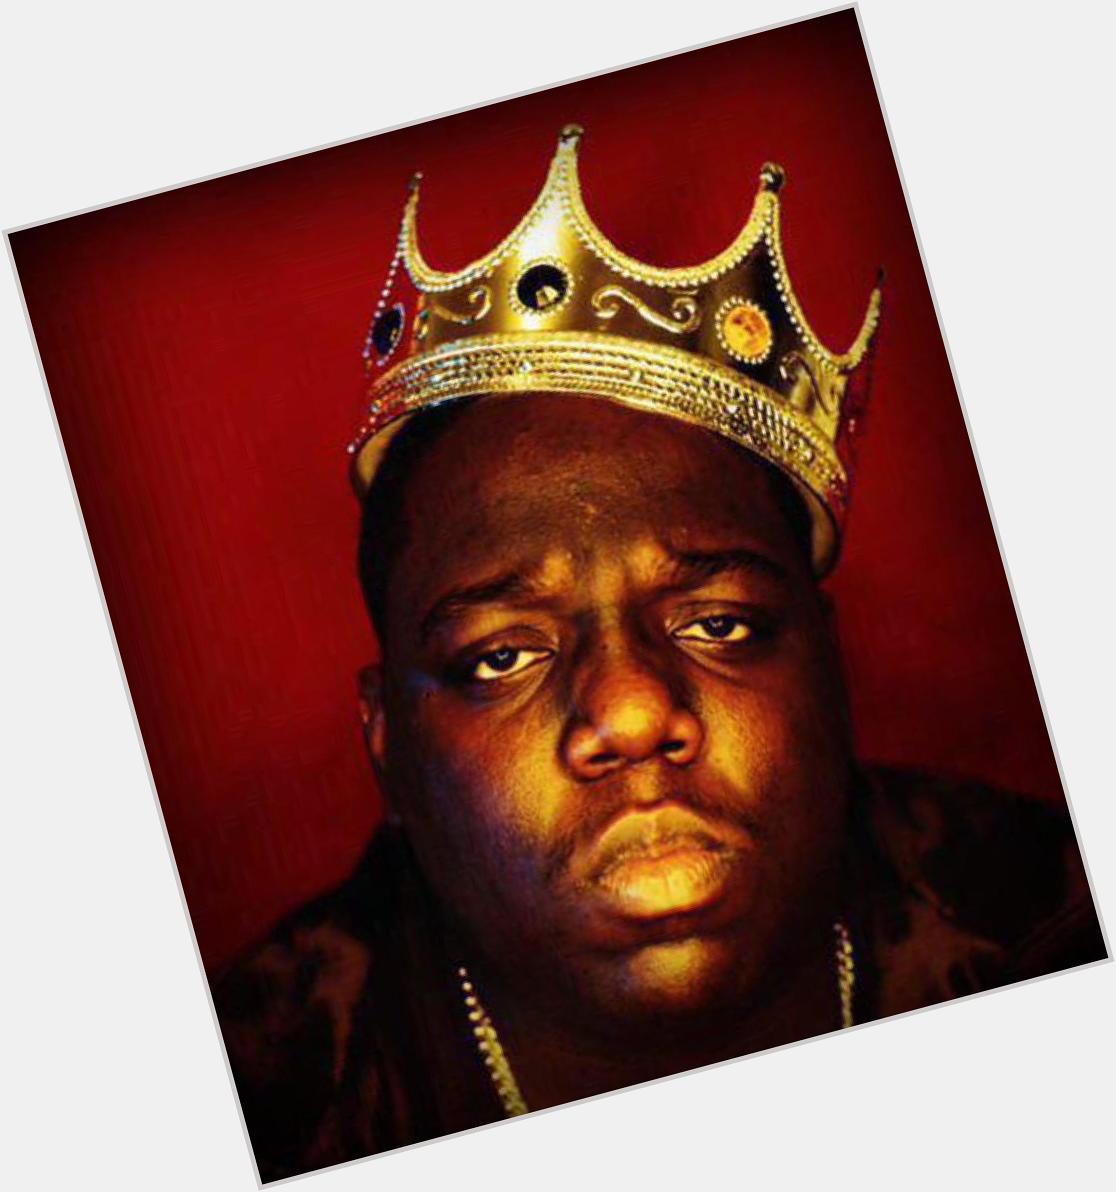 Happy bday to the Notorious B.I.G had the the craziest bars & smoothest flow EVER we were robbed of a great 